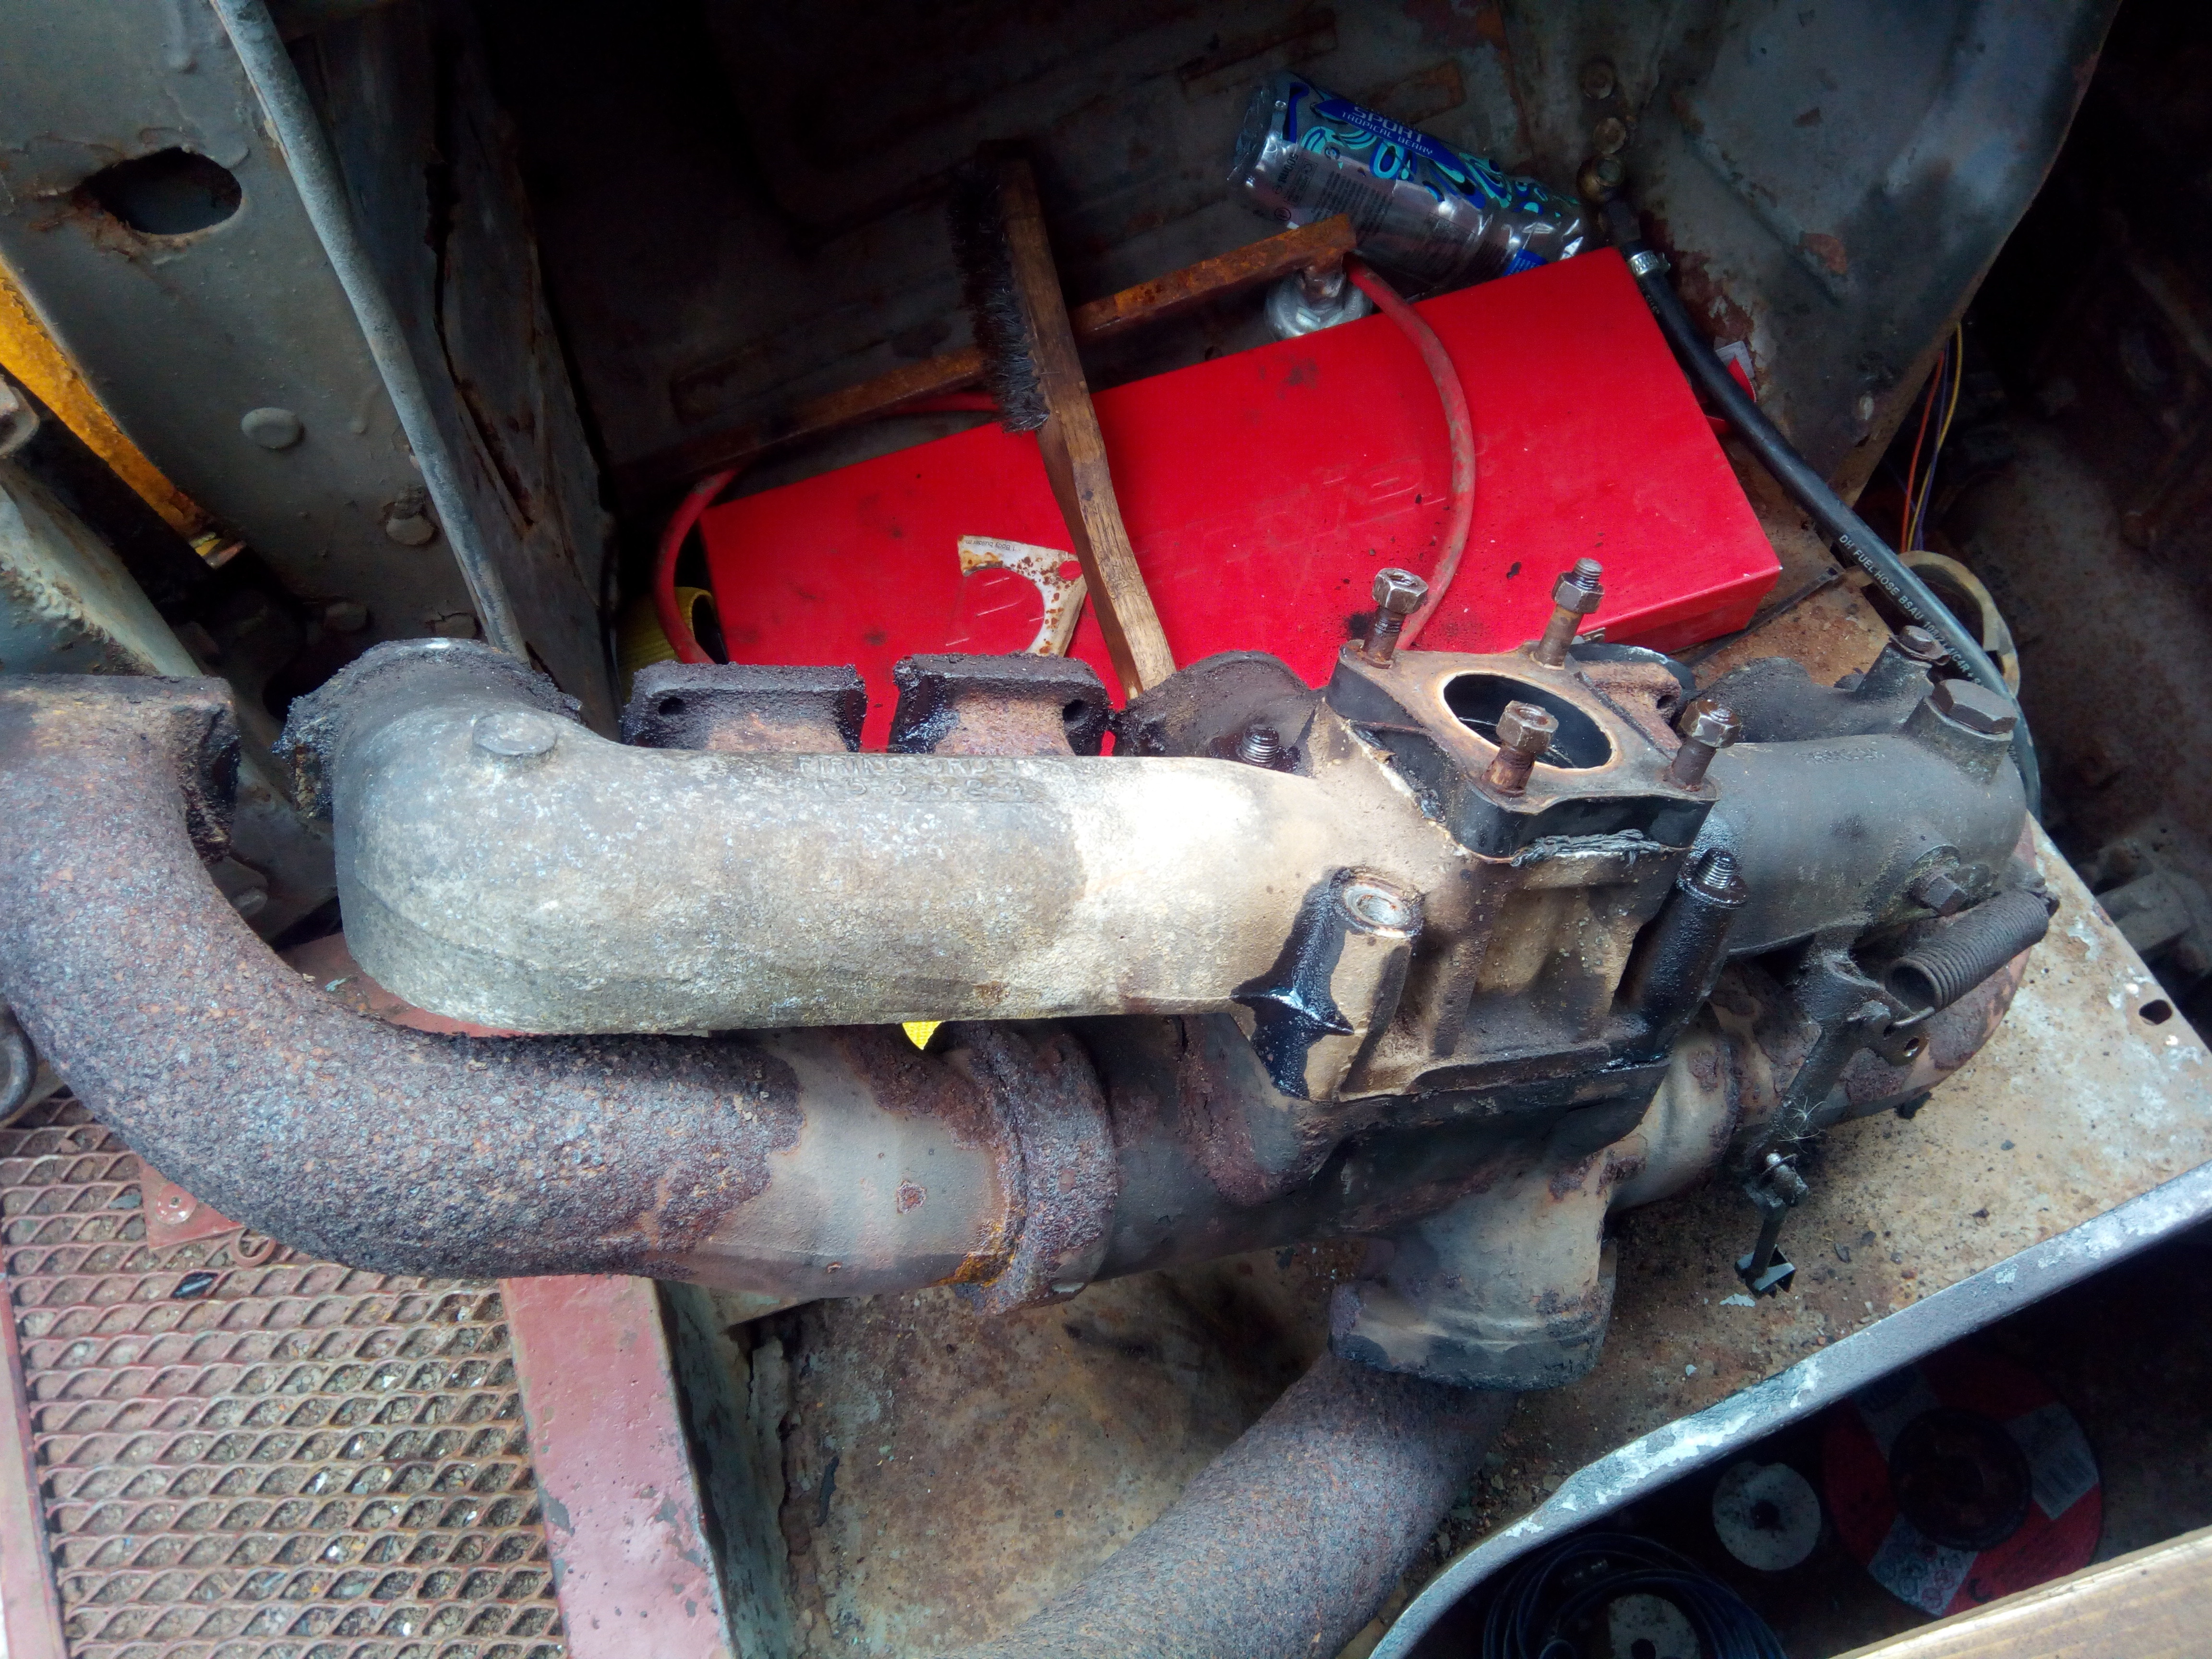 The two cojoined manifolds plonked unceremoniously in the
passenger's footwell of the truck.